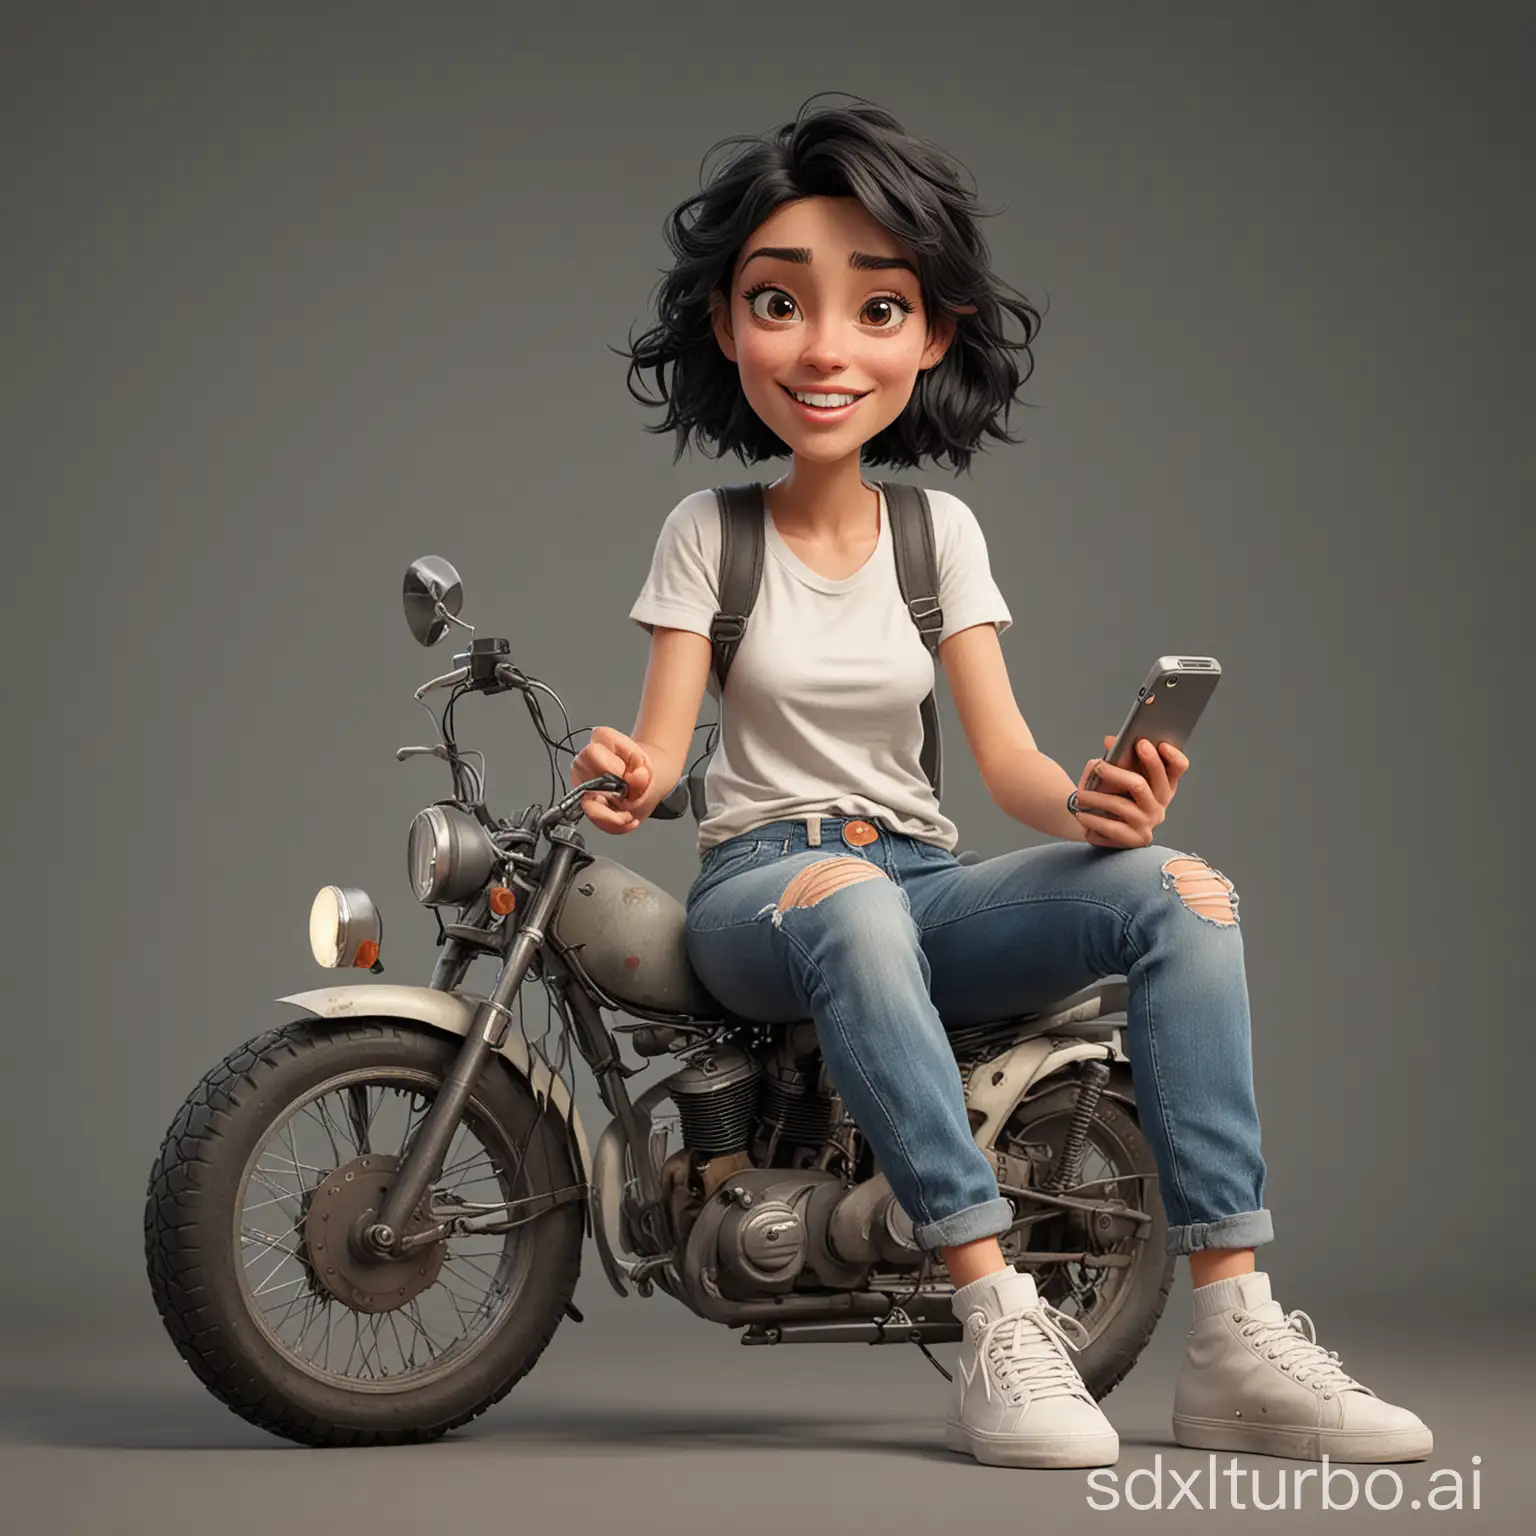 create a realistic 3D caricature Disney pixar style full body with a large head. A 30 year old woman with short, wavy black hair, sitting on a motorbike while playing on his cellphone. Wearing a white t-shirt covered with a cream colored shirt. wearing worn and torn gray jeans. wearing white sneakers with black socks. Sit with your legs apart, right hand plucking the strings, left hand pressing the scales. The background is workshop and contrast. improves the overall composition of the image. Use soft photographic lighting, dramatic overhead lighting, very high image quality, clear character details, UHD, 16k